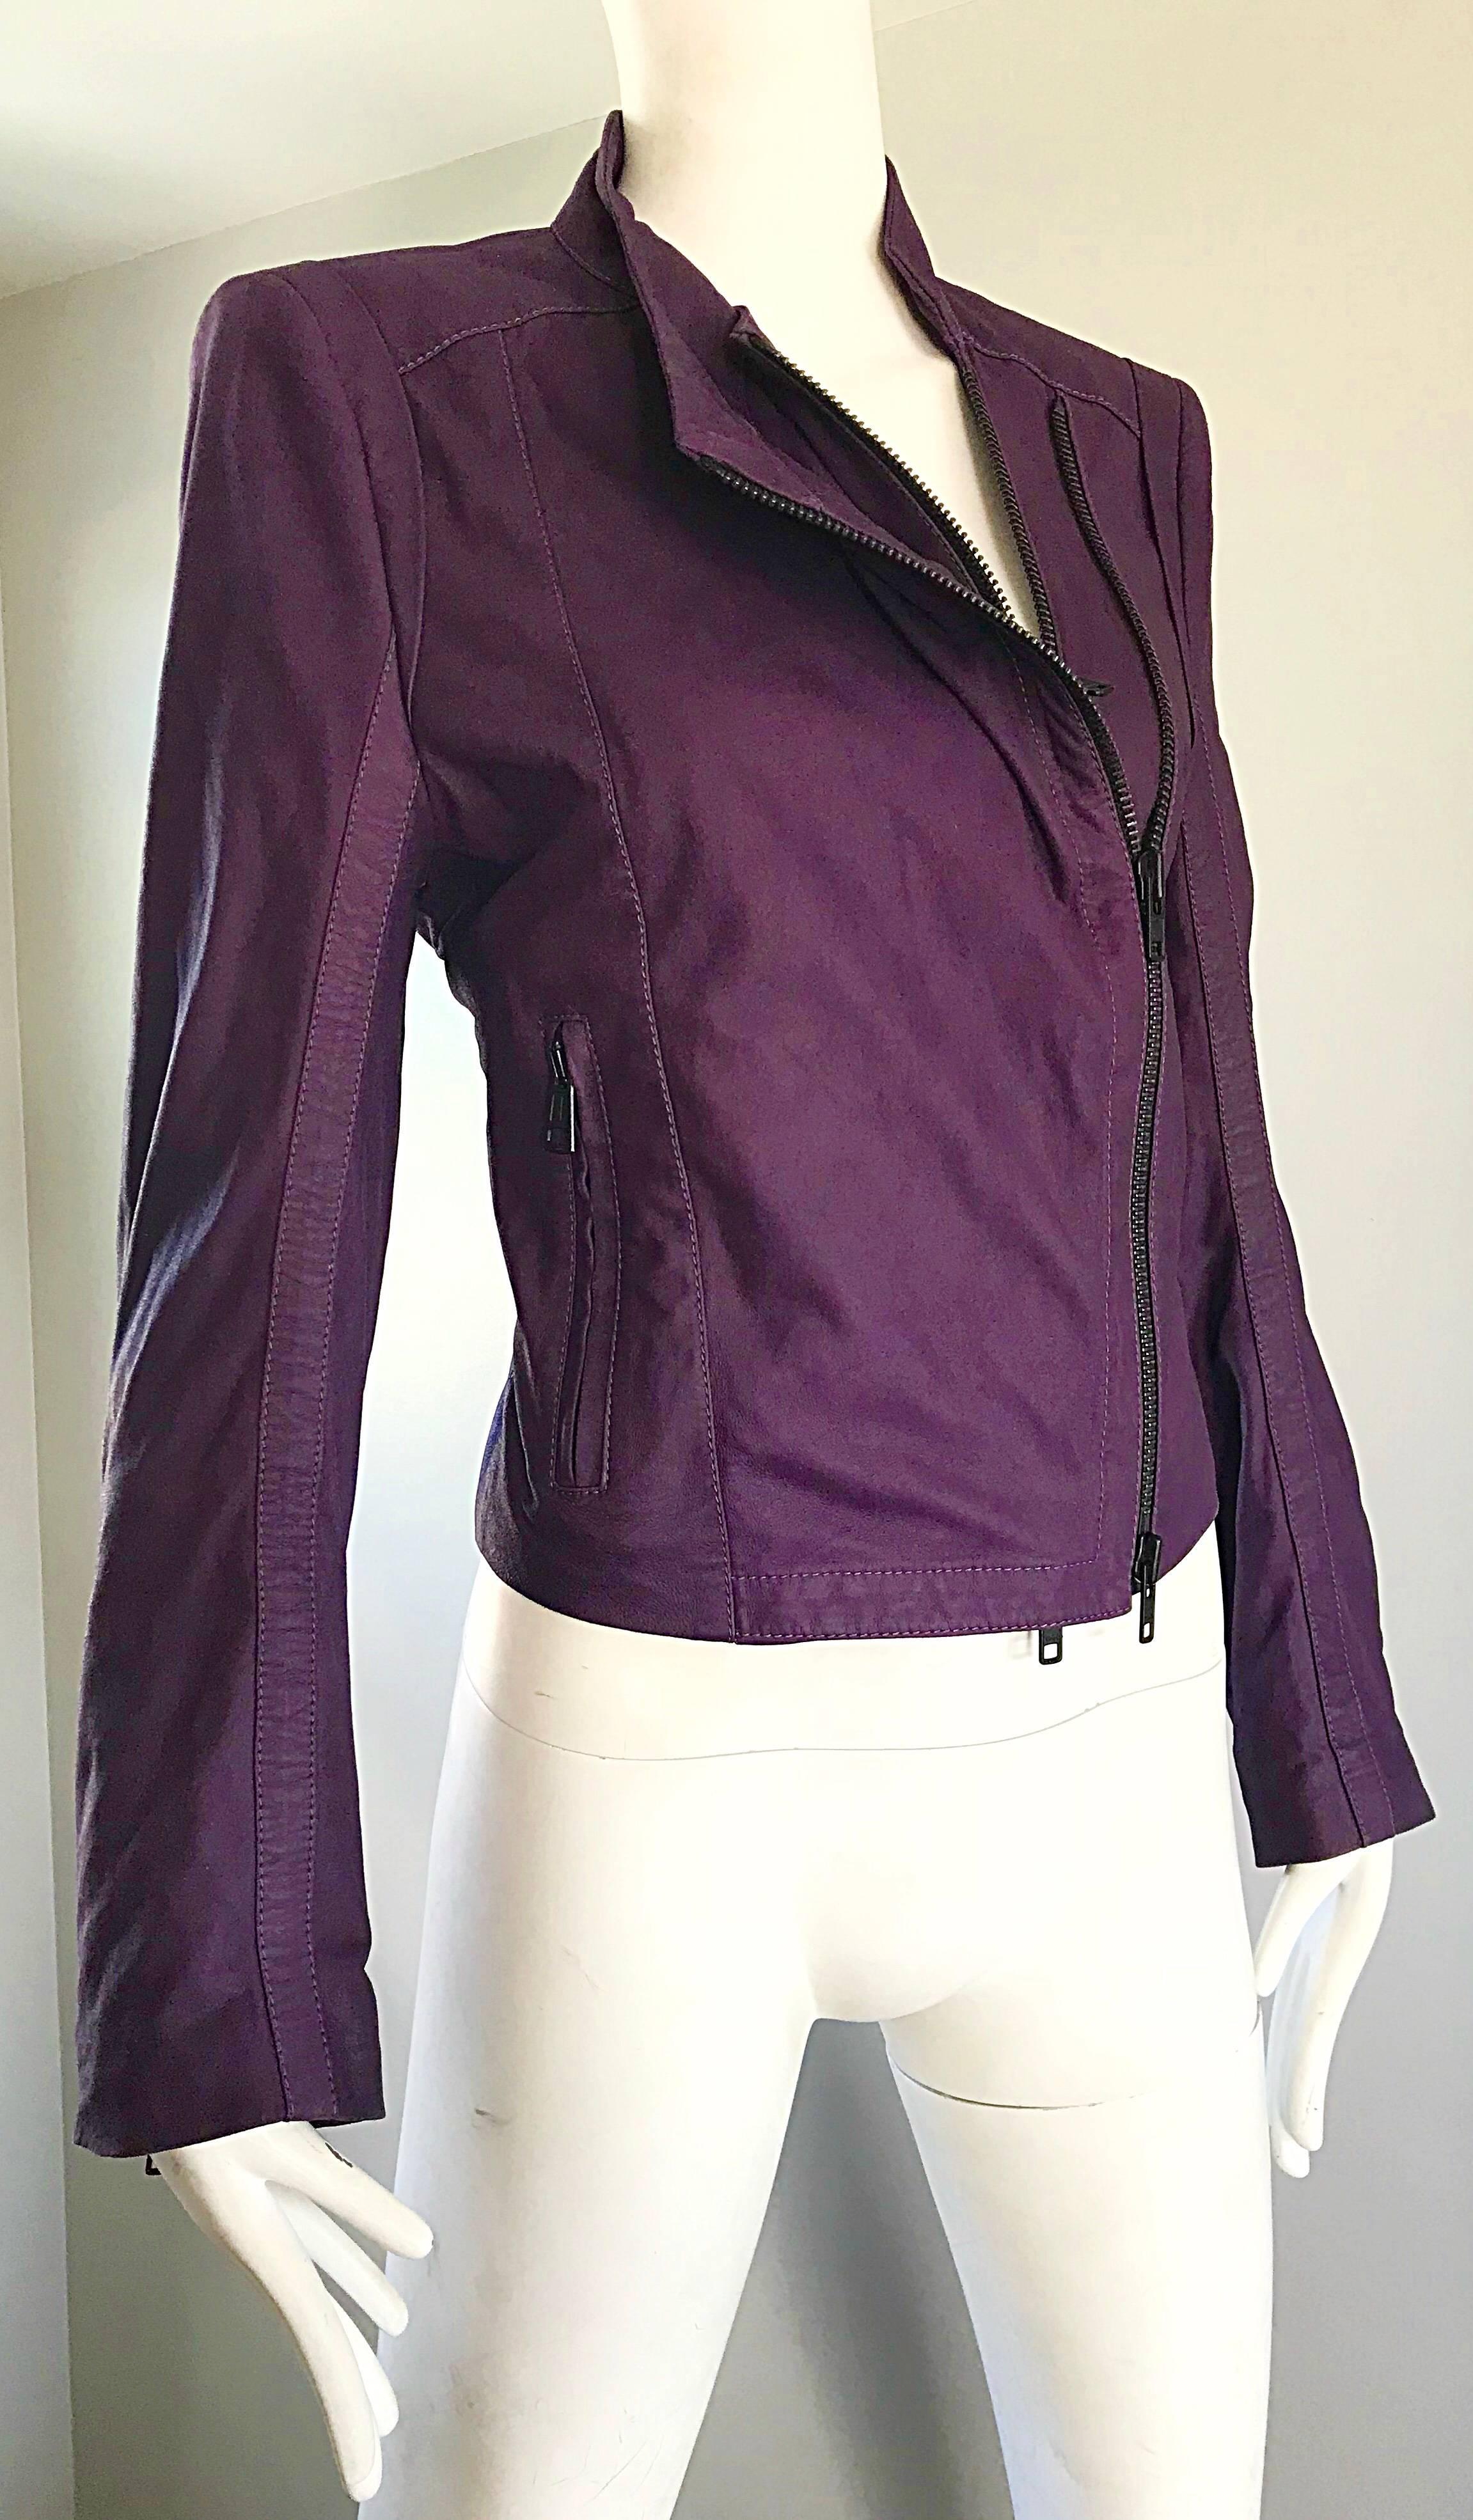 Ann Demeulemeester 1990s Purple Eggplant Leather 90s Fitted Vintage Moto Jacket In Excellent Condition For Sale In San Diego, CA